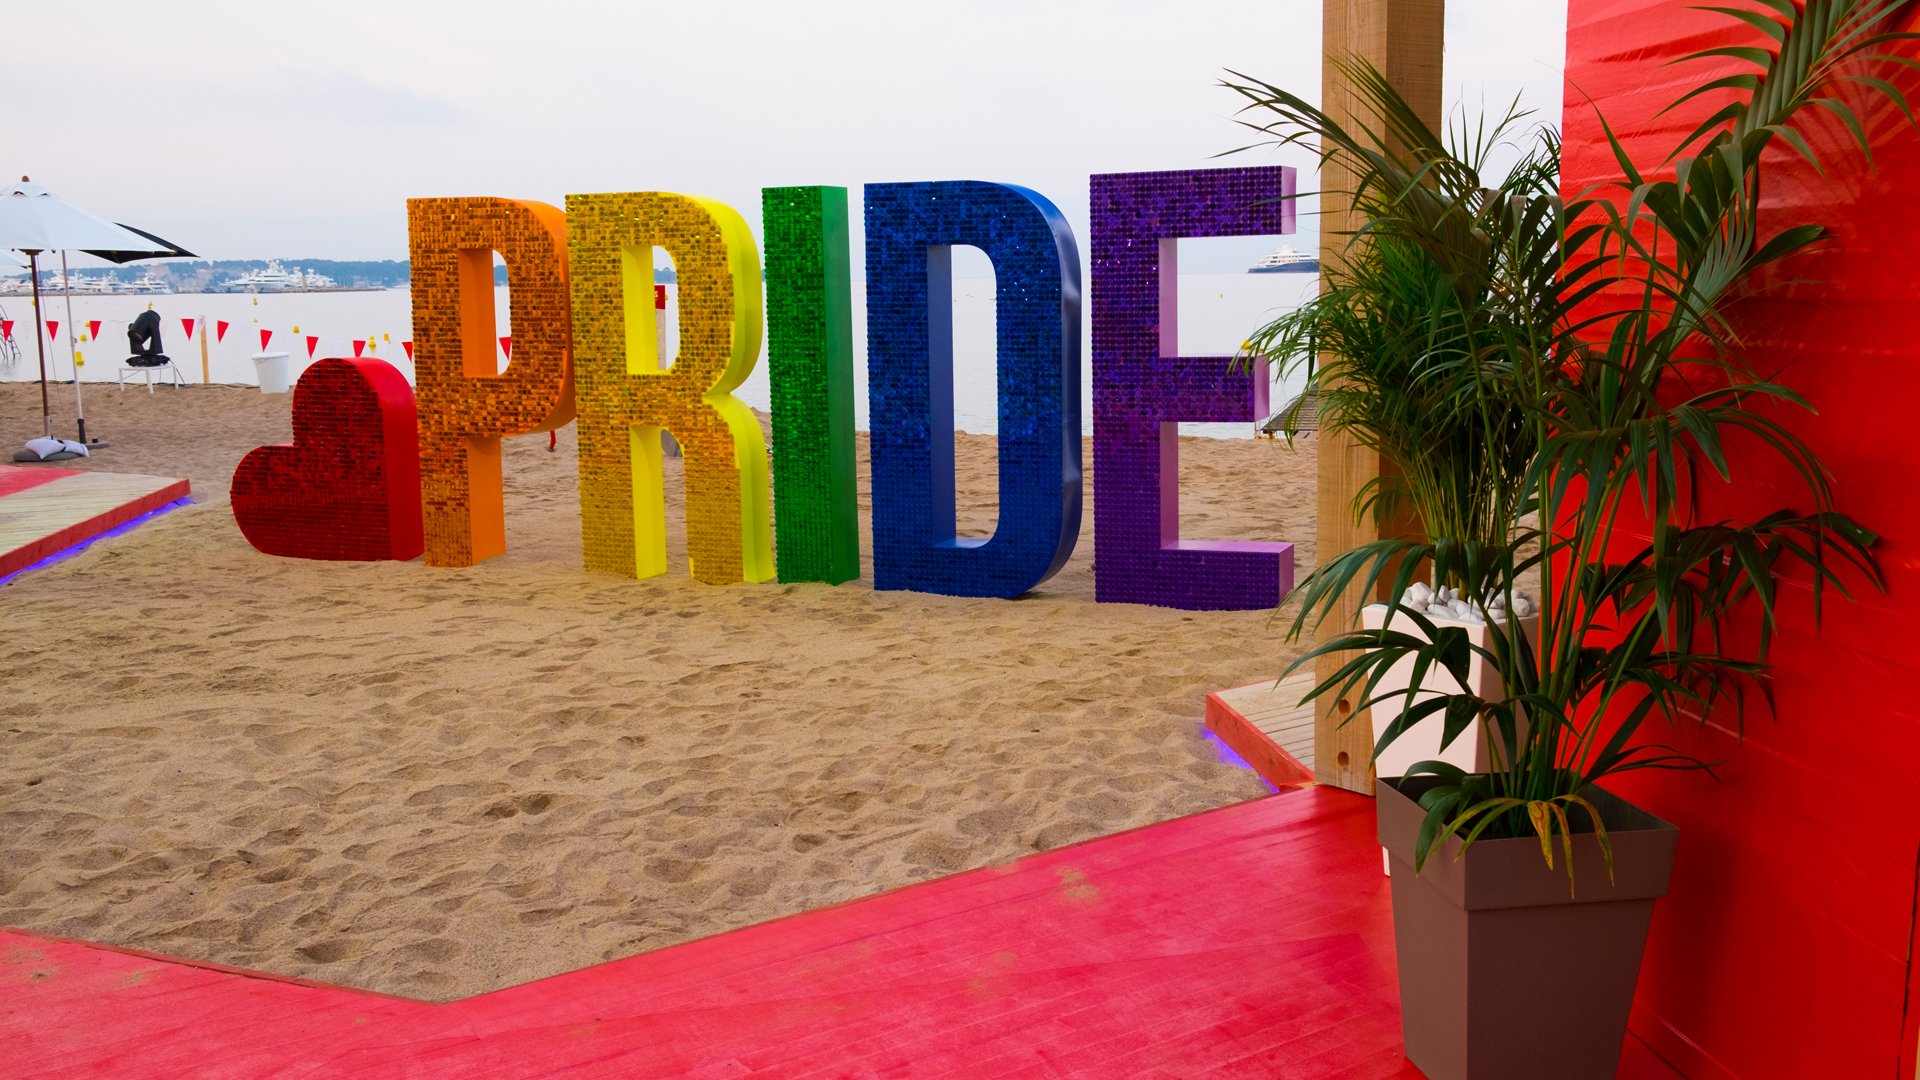 1920x1080 px_Event_Pride Cannes Beach Party